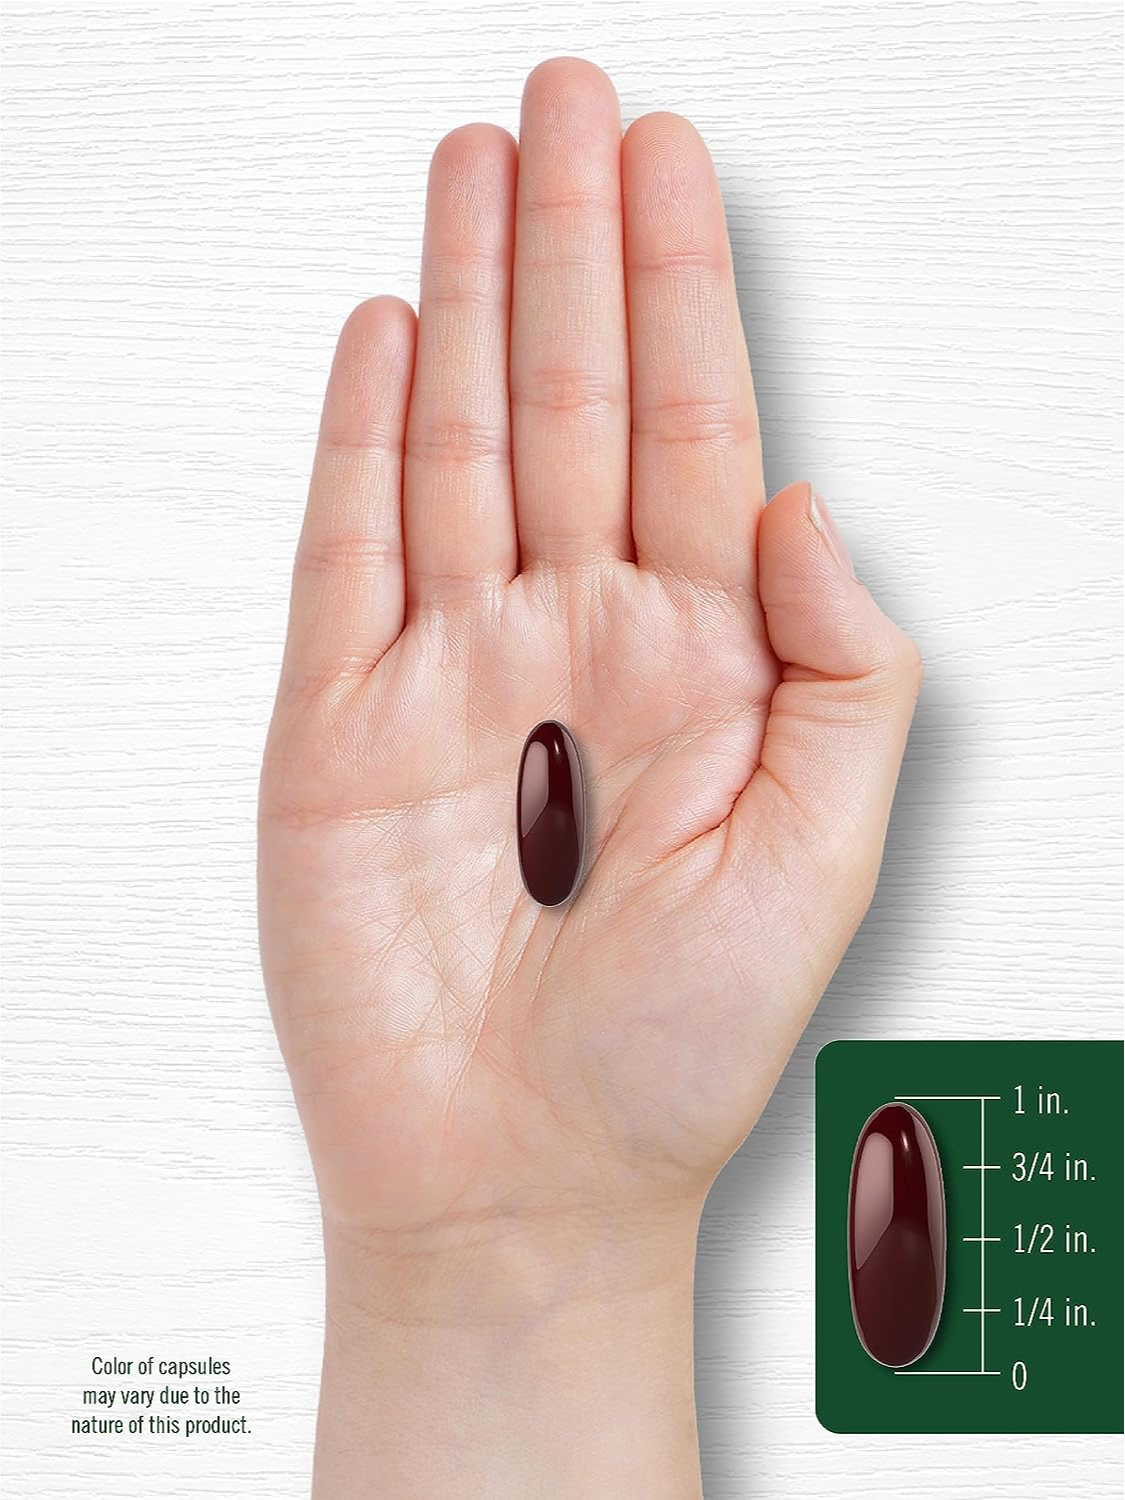 OEM High quality manufacturer Black Seed Oil 2000mg softgels Support hair and skin growth 60 Softgel Capsules